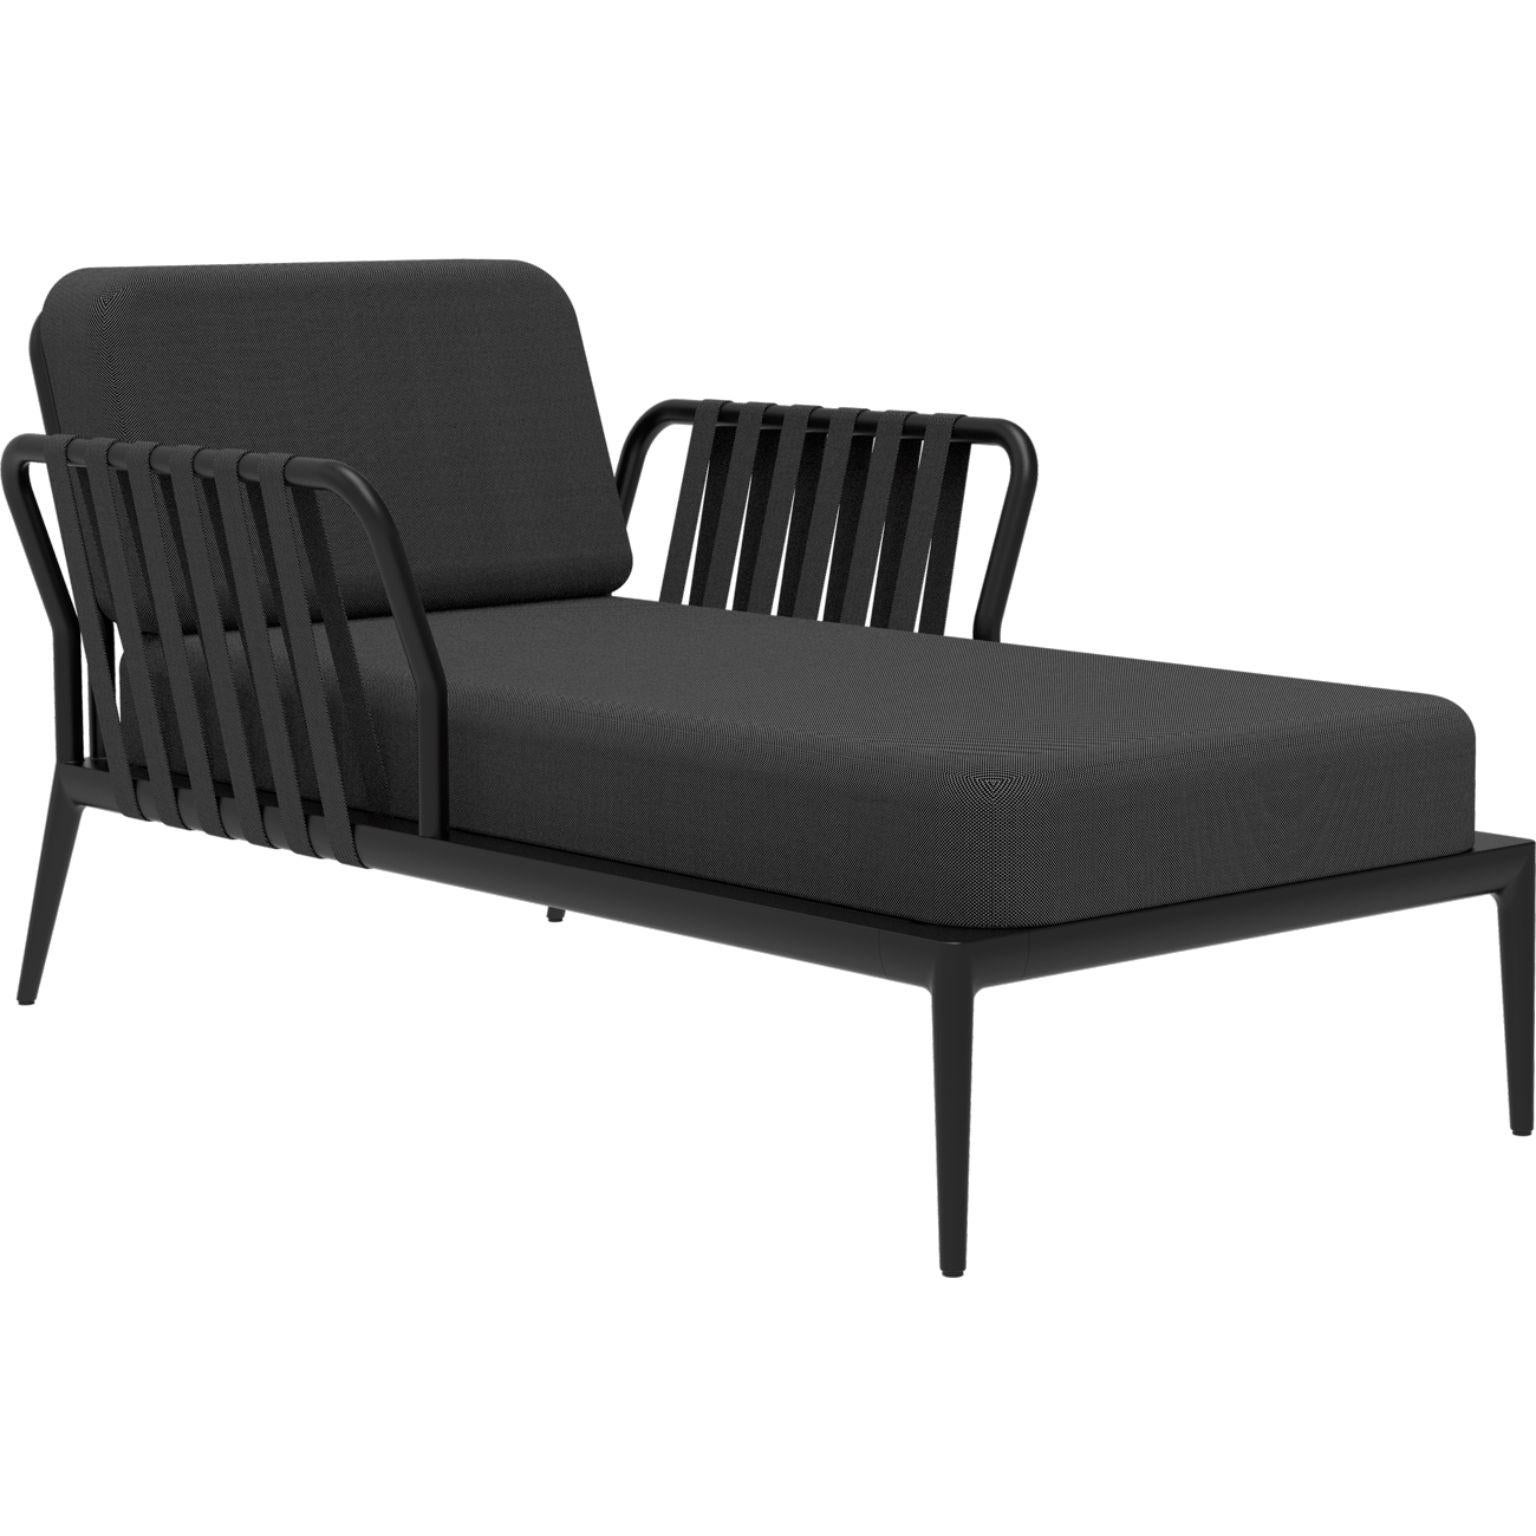 Ribbons black Divan by MOWEE
Dimensions: D91 x W155 x H81 cm (seat height 42cm)
Material: Aluminum and upholstery.
Weight: 30 kg.
Also available in different colors and finishes. 

An unmistakable collection for its beauty and robustness. A